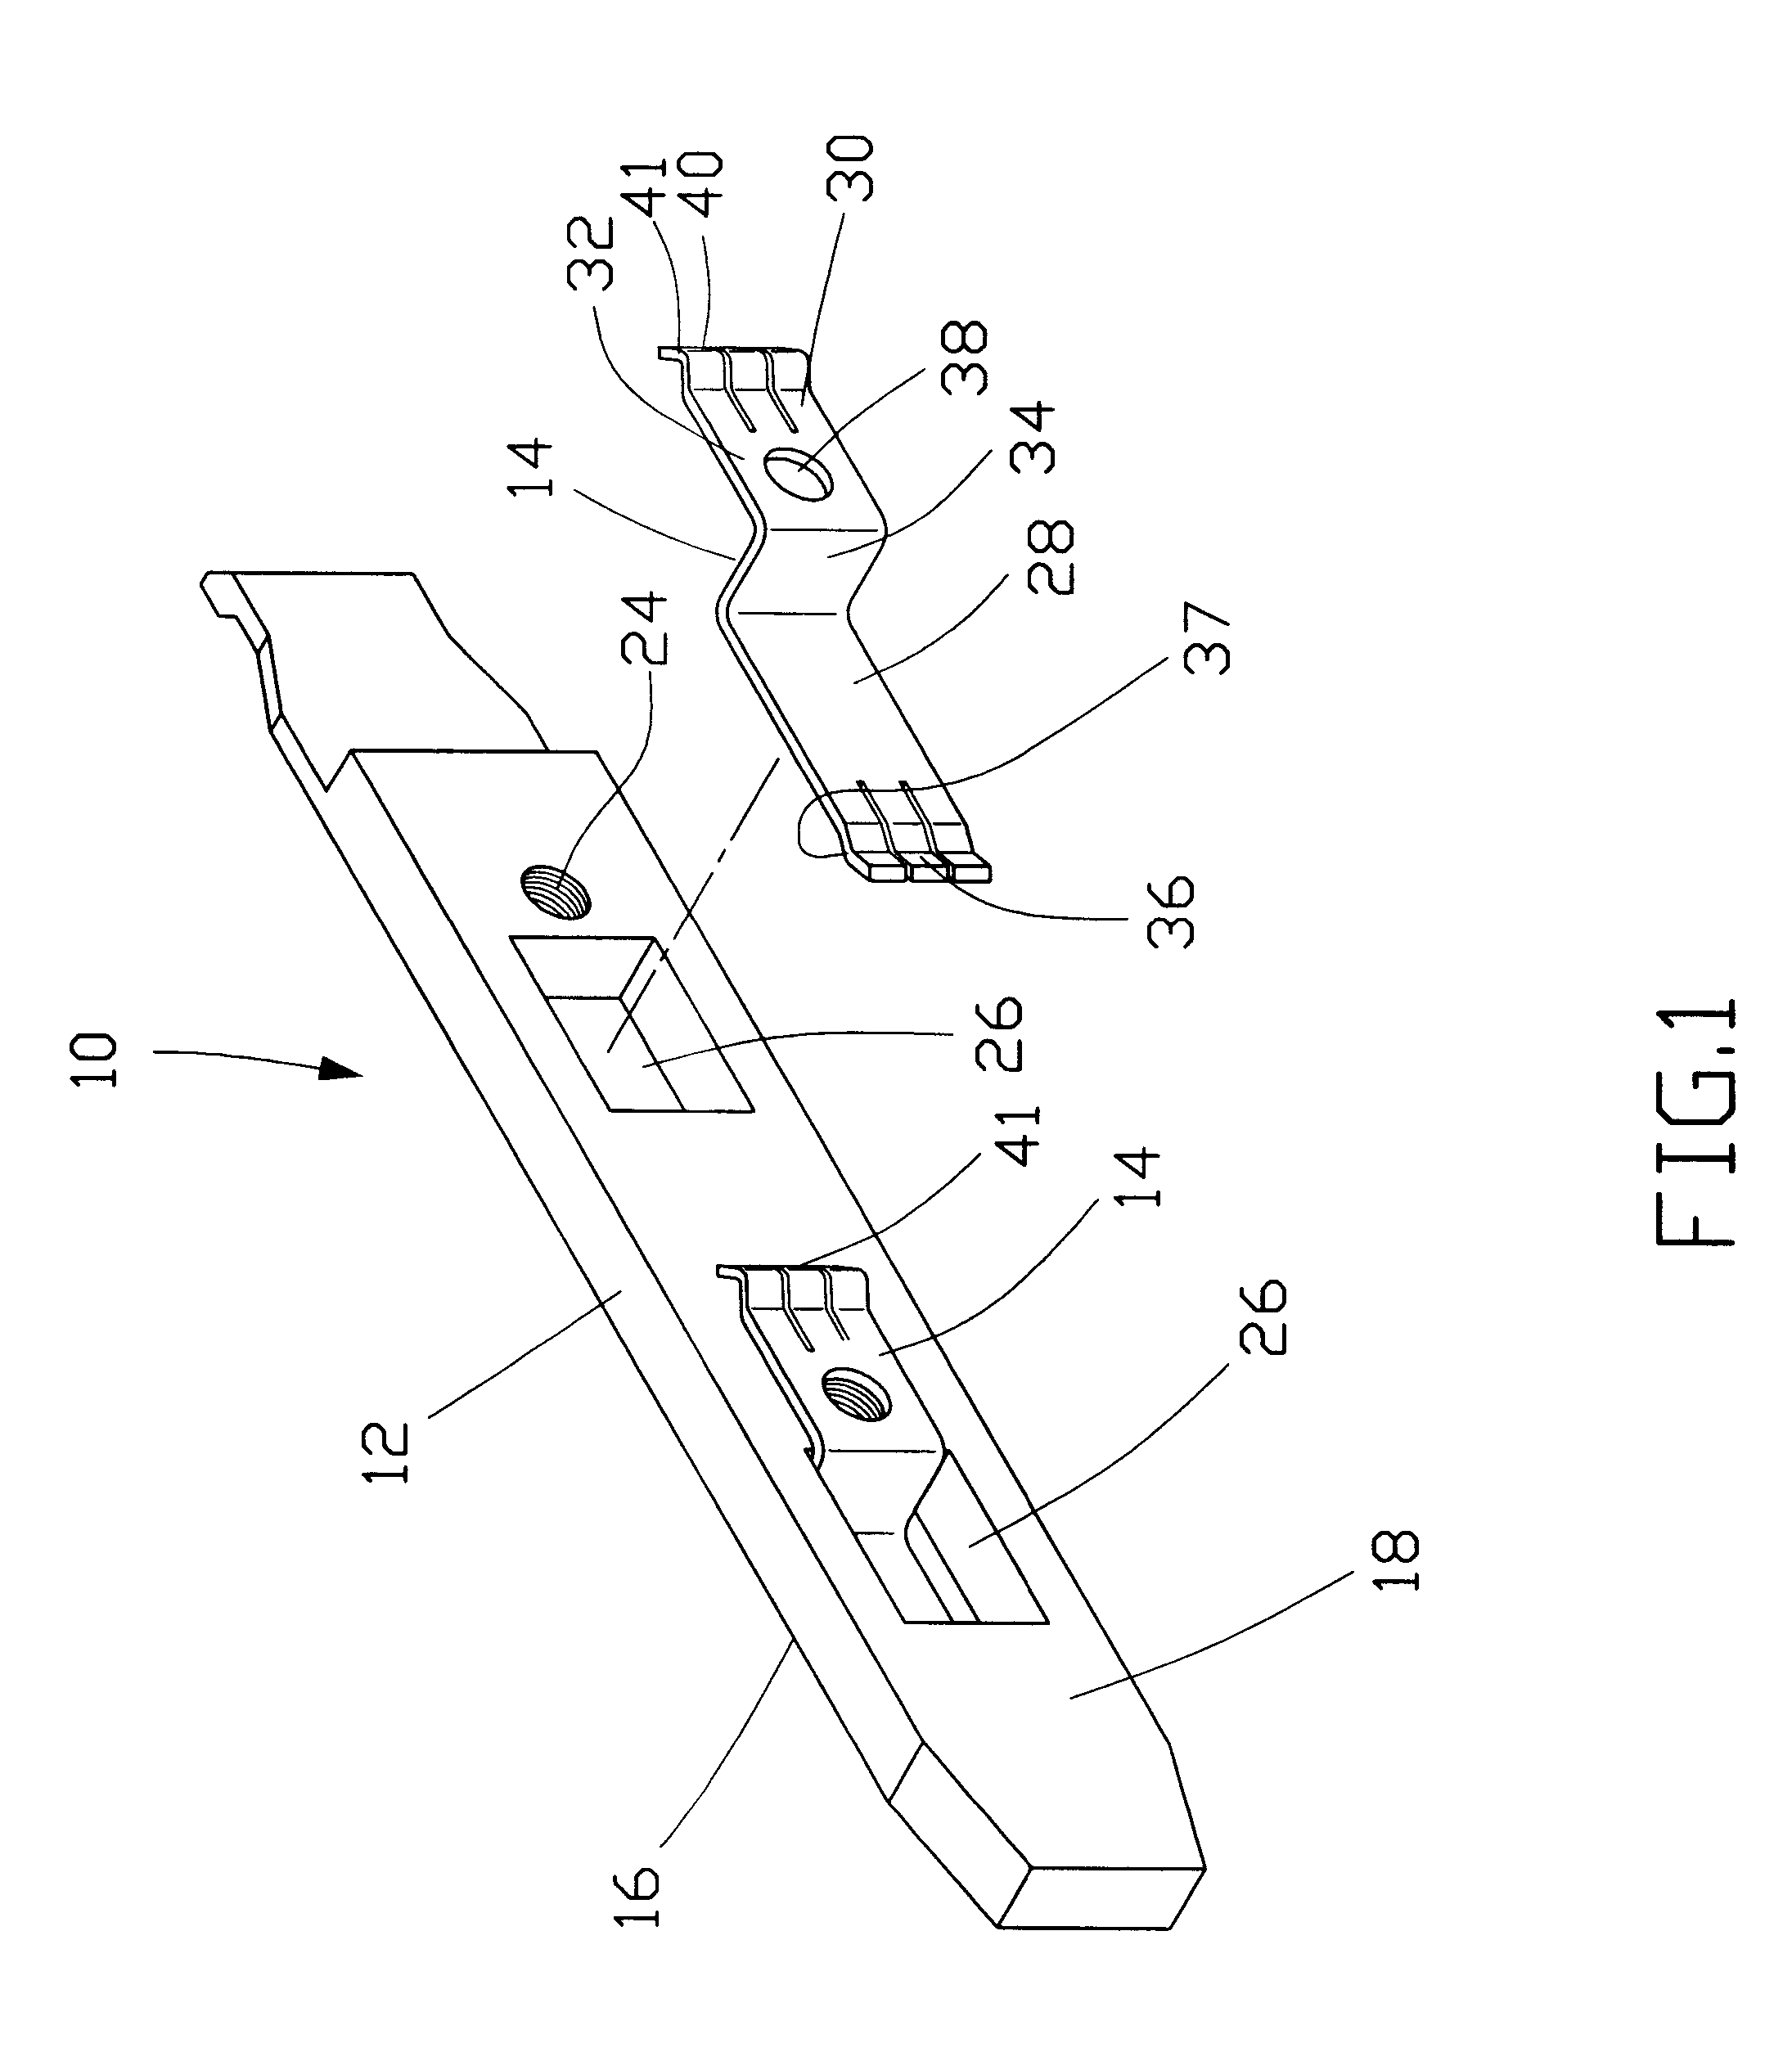 Mounting device for mounting a data storage device